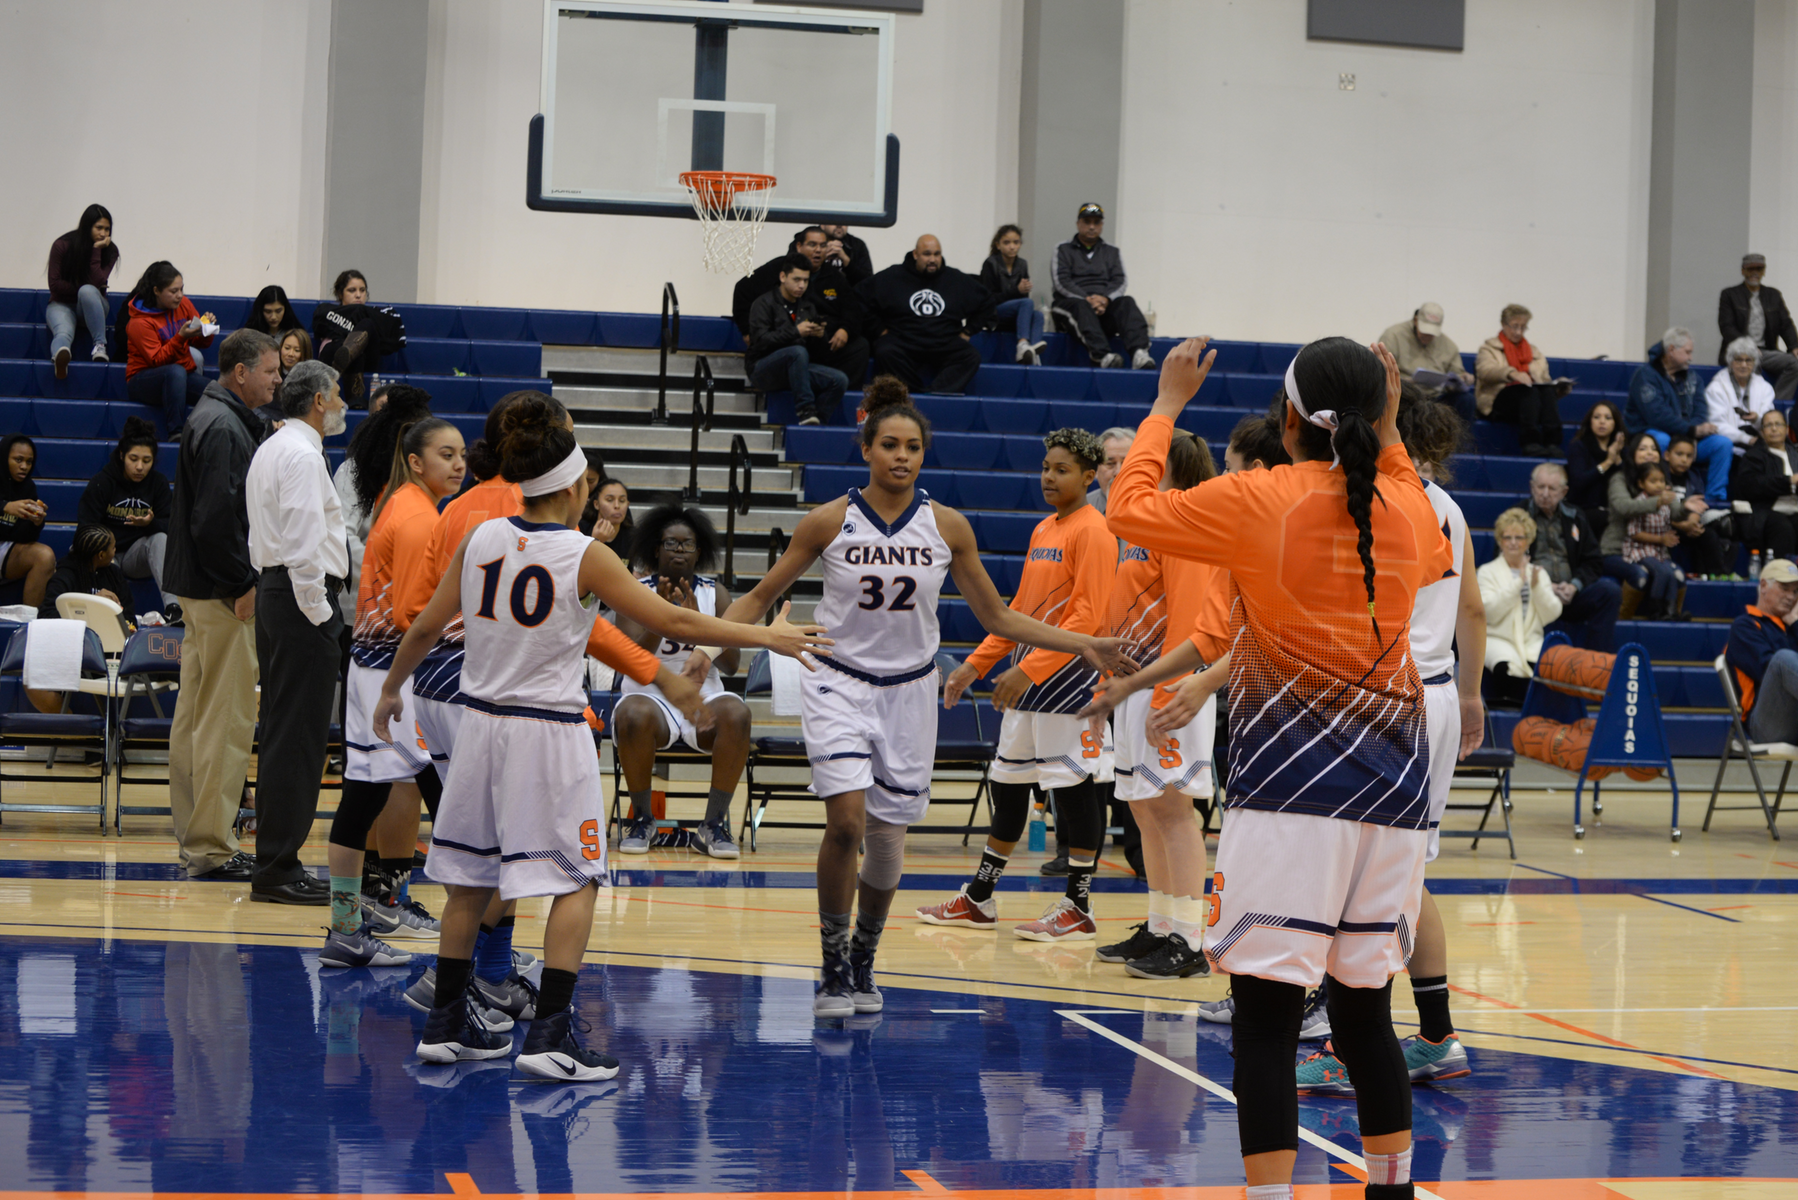 Women's Basketball continue to climb in the rankings